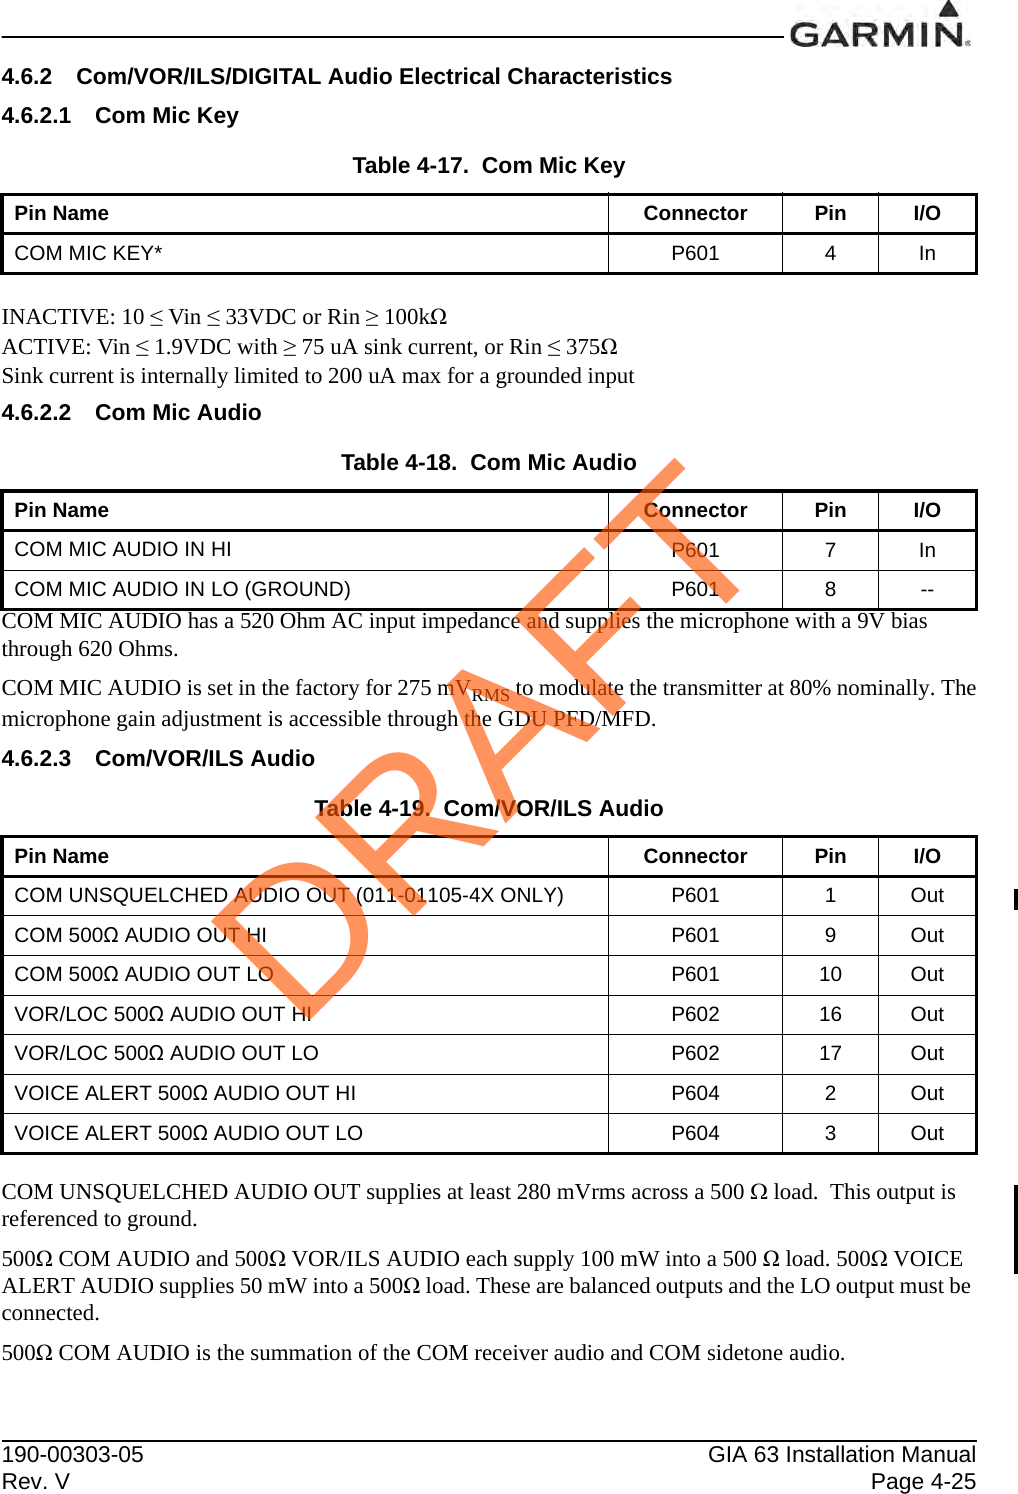 190-00303-05 GIA 63 Installation ManualRev. V Page 4-254.6.2 Com/VOR/ILS/DIGITAL Audio Electrical Characteristics4.6.2.1 Com Mic KeyINACTIVE: 10 ≤ Vin ≤ 33VDC or Rin ≥ 100kΩACTIVE: Vin ≤ 1.9VDC with ≥ 75 uA sink current, or Rin ≤ 375ΩSink current is internally limited to 200 uA max for a grounded input4.6.2.2 Com Mic AudioCOM MIC AUDIO has a 520 Ohm AC input impedance and supplies the microphone with a 9V bias through 620 Ohms.COM MIC AUDIO is set in the factory for 275 mVRMS to modulate the transmitter at 80% nominally. Themicrophone gain adjustment is accessible through the GDU PFD/MFD.4.6.2.3 Com/VOR/ILS AudioCOM UNSQUELCHED AUDIO OUT supplies at least 280 mVrms across a 500  load.  This output is referenced to ground.500Ω COM AUDIO and 500Ω VOR/ILS AUDIO each supply 100 mW into a 500 Ω load. 500Ω VOICE ALERT AUDIO supplies 50 mW into a 500Ω load. These are balanced outputs and the LO output must be connected.500Ω COM AUDIO is the summation of the COM receiver audio and COM sidetone audio.Table 4-17.  Com Mic KeyPin Name Connector Pin I/OCOM MIC KEY* P601 4InTable 4-18.  Com Mic AudioPin Name Connector Pin I/OCOM MIC AUDIO IN HI P601 7InCOM MIC AUDIO IN LO (GROUND) P601 8--Table 4-19.  Com/VOR/ILS AudioPin Name Connector Pin I/OCOM UNSQUELCHED AUDIO OUT (011-01105-4X ONLY) P601 1OutCOM 500Ω AUDIO OUT HI P601 9OutCOM 500Ω AUDIO OUT LO P601 10 OutVOR/LOC 500Ω AUDIO OUT HI P602 16 OutVOR/LOC 500Ω AUDIO OUT LO P602 17 OutVOICE ALERT 500Ω AUDIO OUT HI P604 2OutVOICE ALERT 500Ω AUDIO OUT LO P604 3OutDRAFT